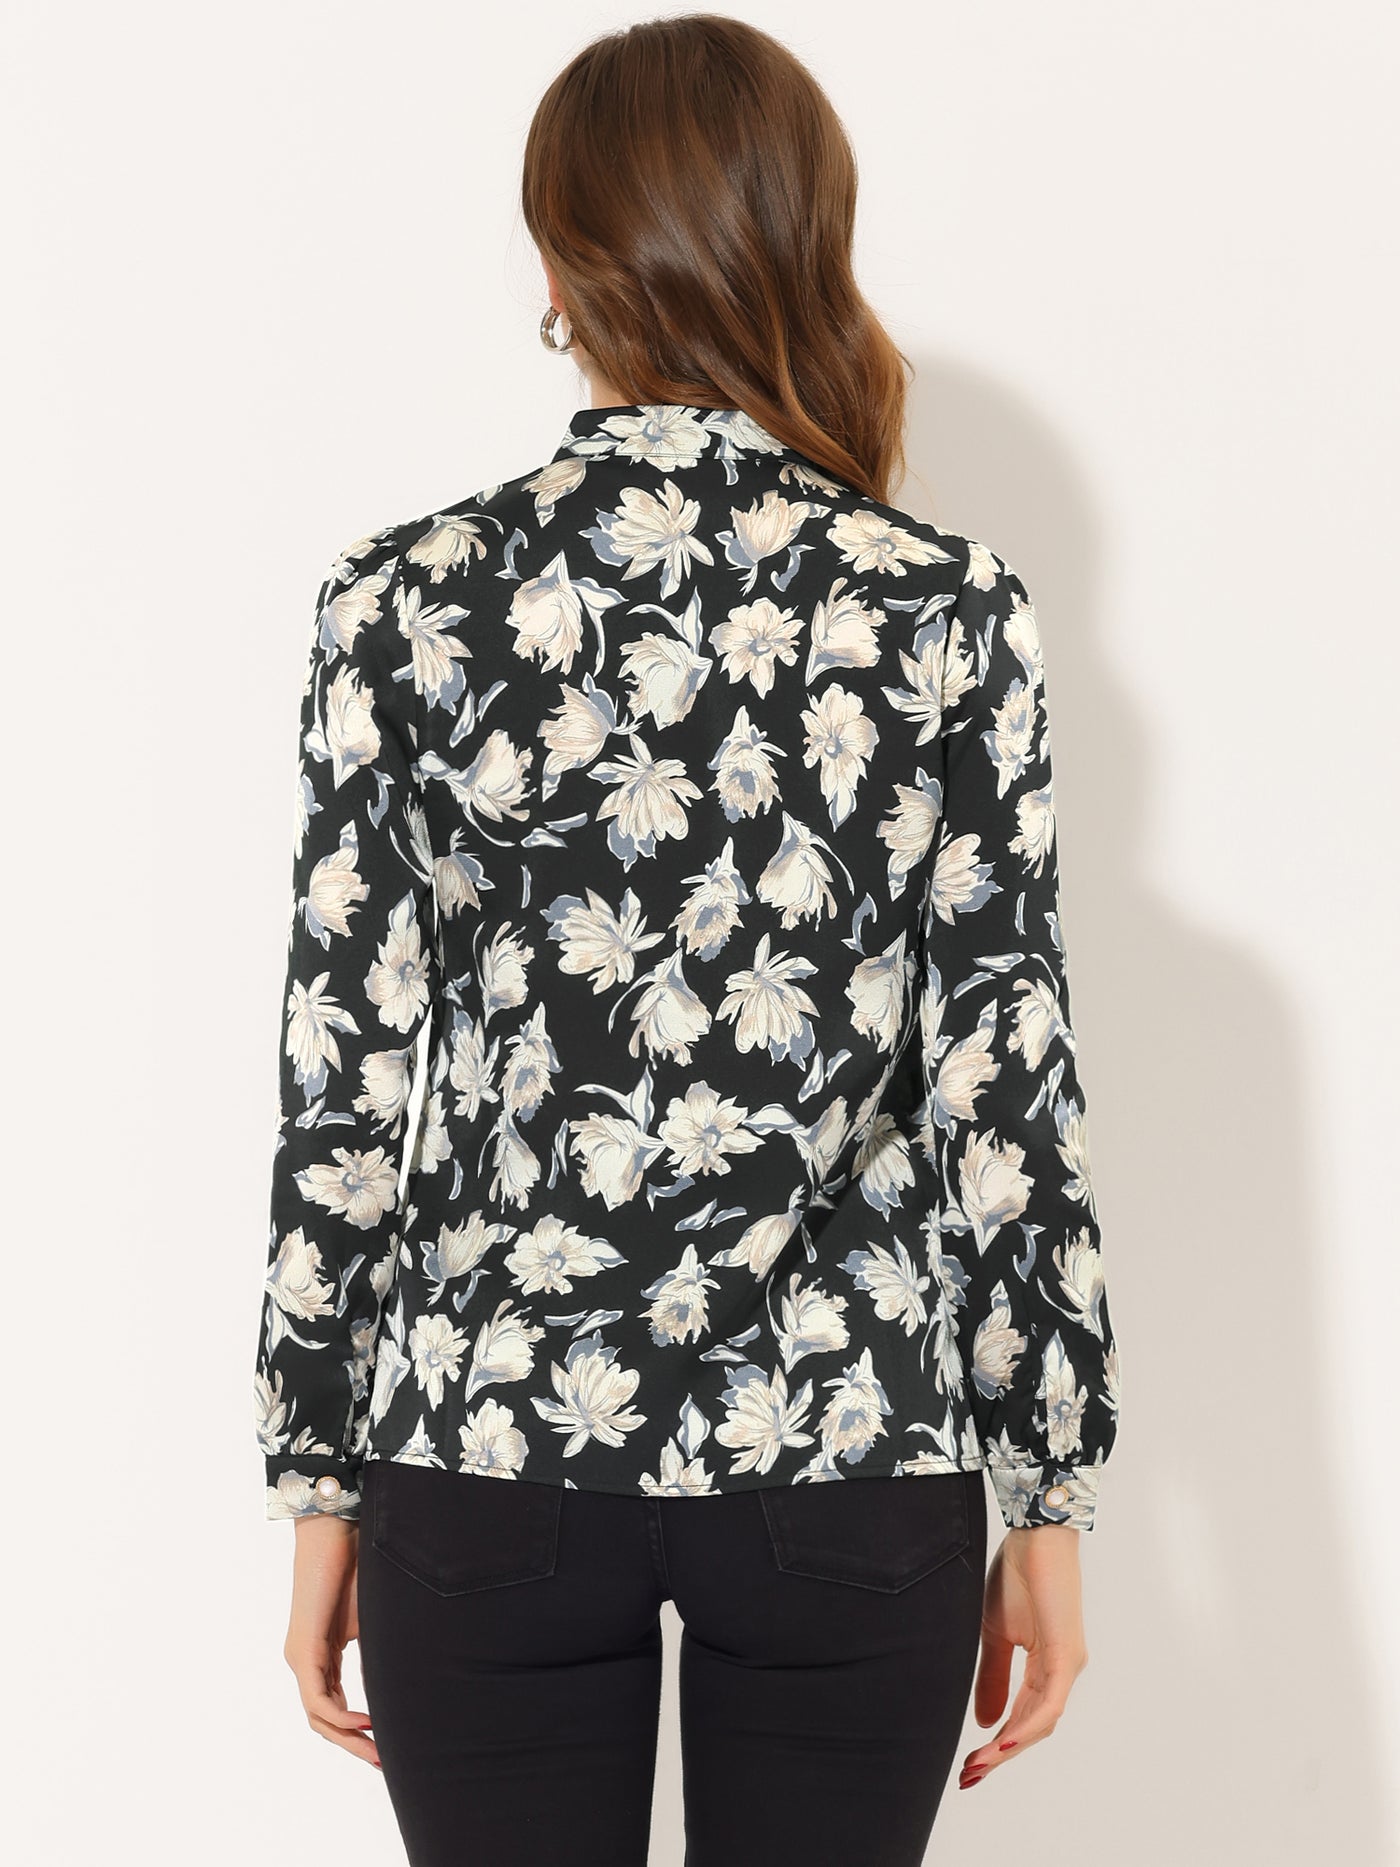 Allegra K Floral Chiffon Blouse for Stand Collar Long Sleeve Button Down Shirt